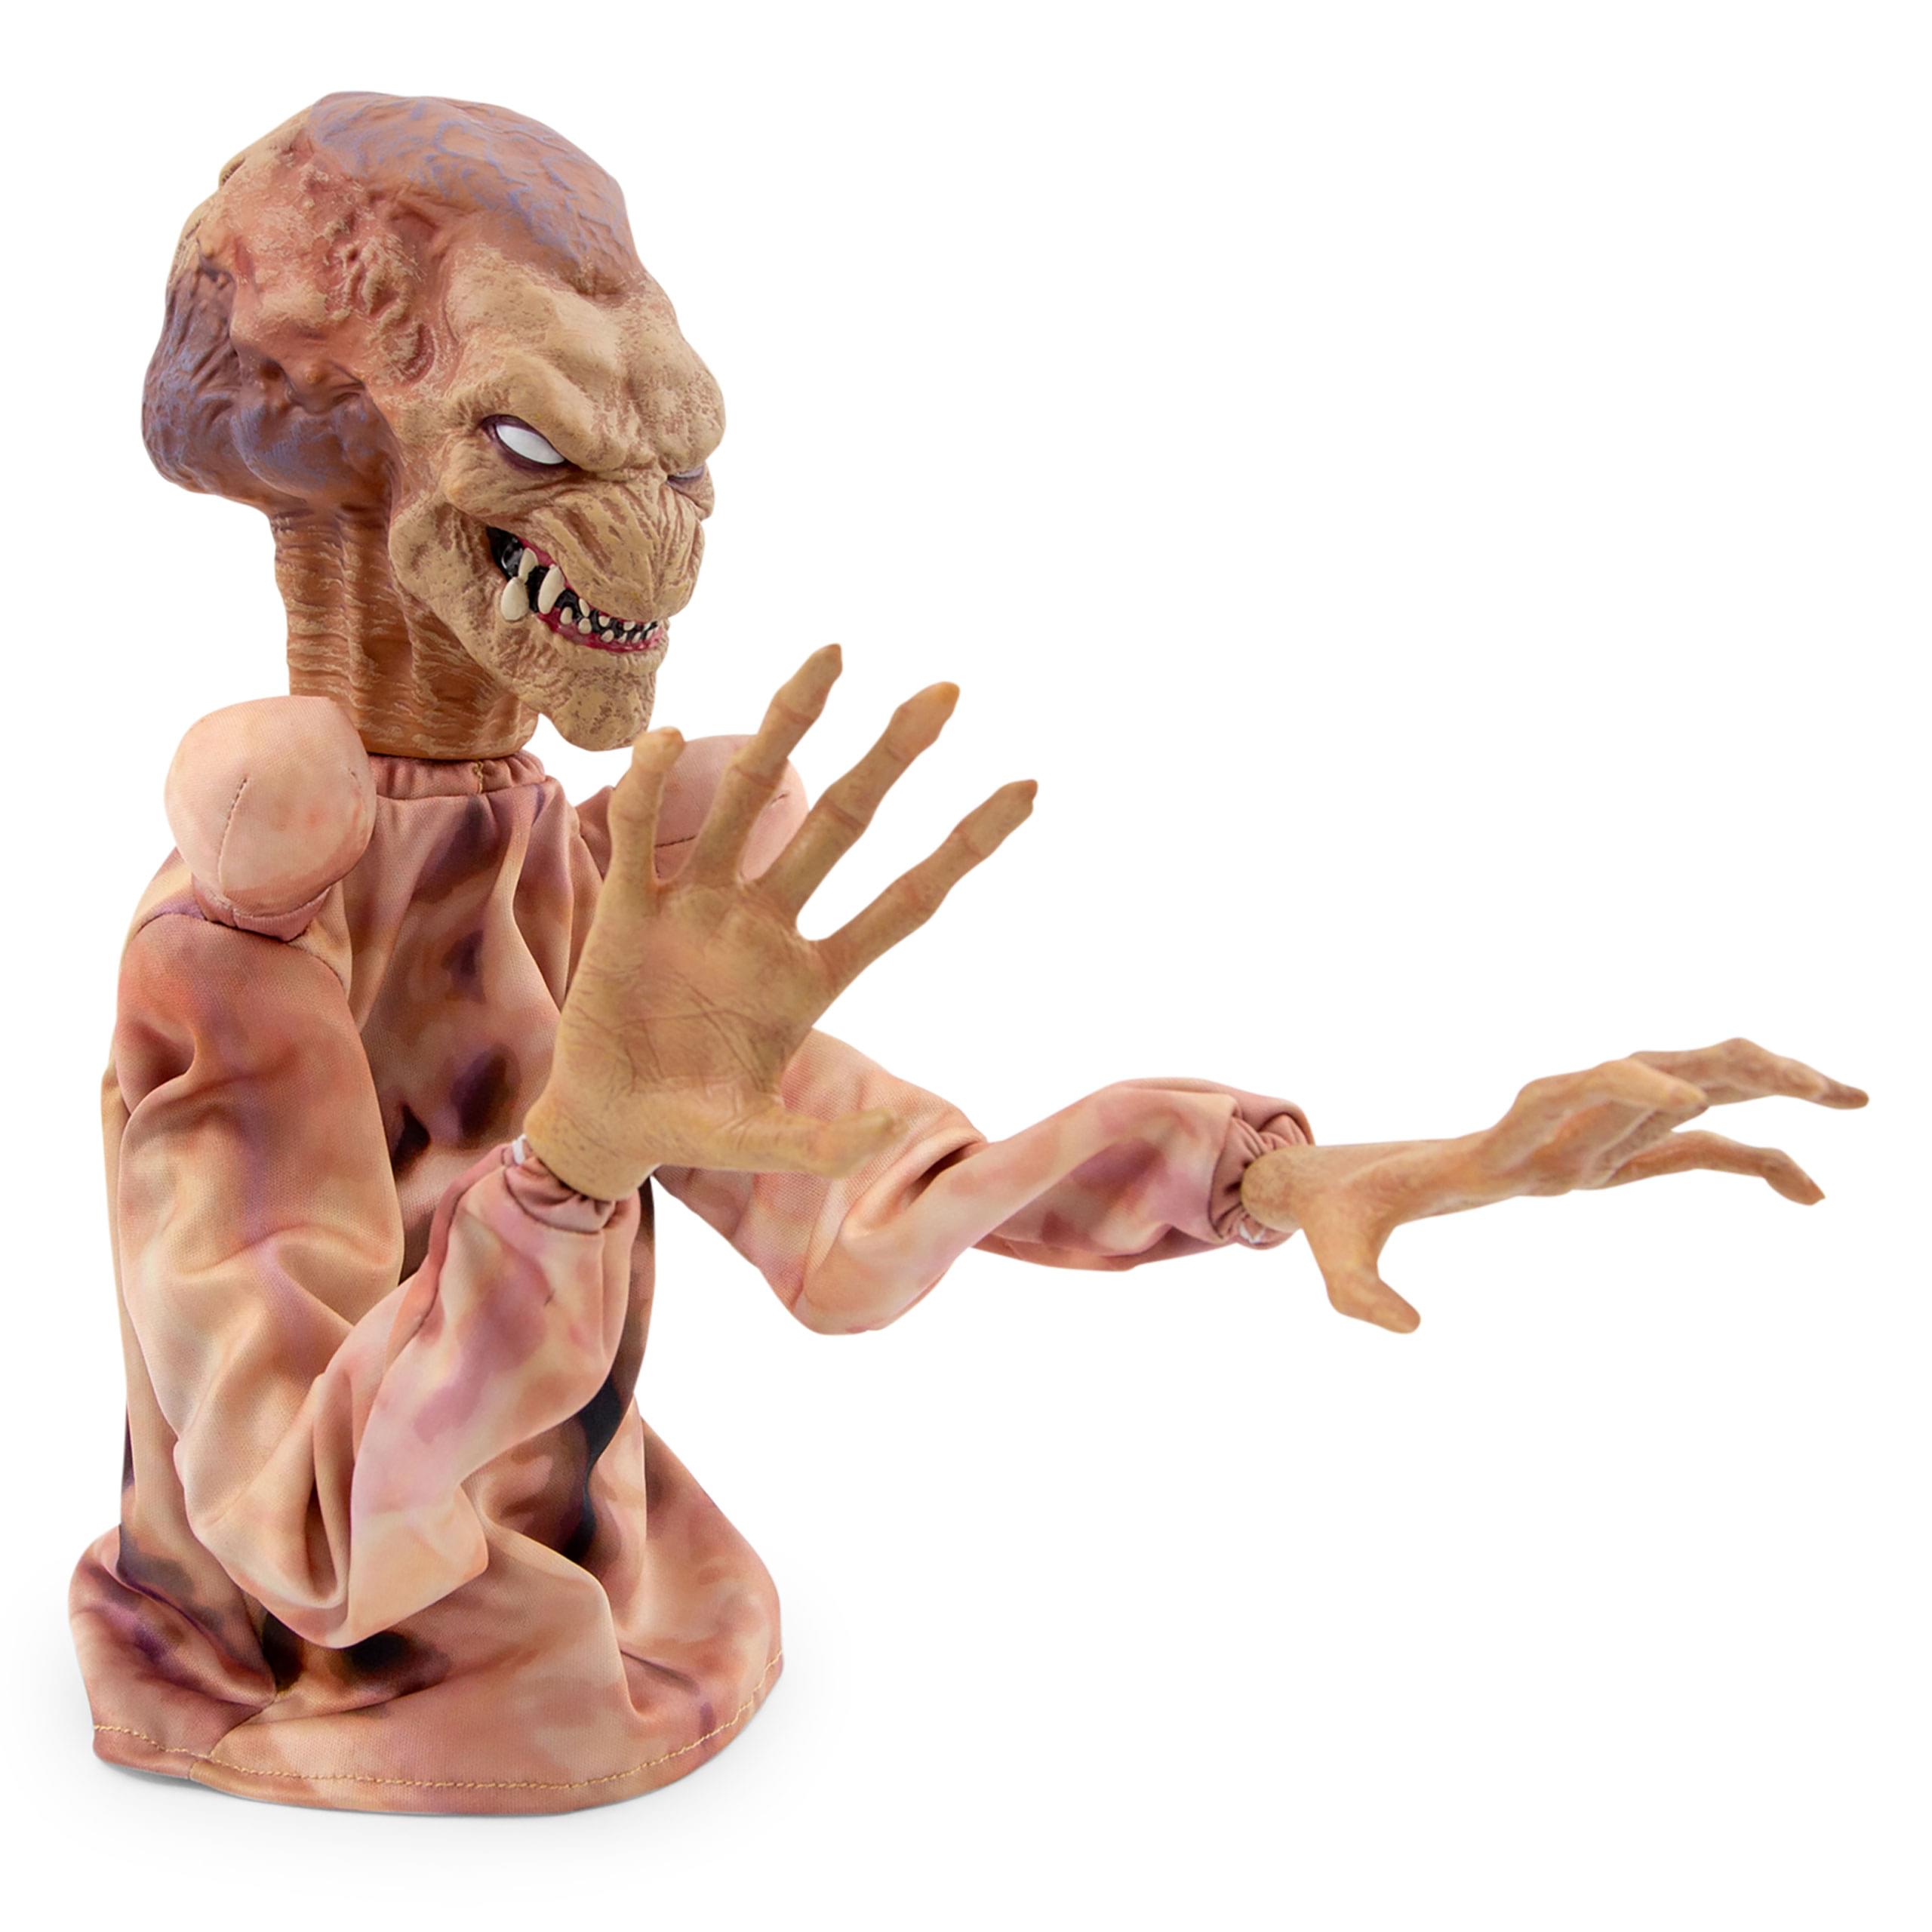 Horror Reachers Pumpkinhead 13-Inch Boxing Puppet Toy | Toynk Exclusive